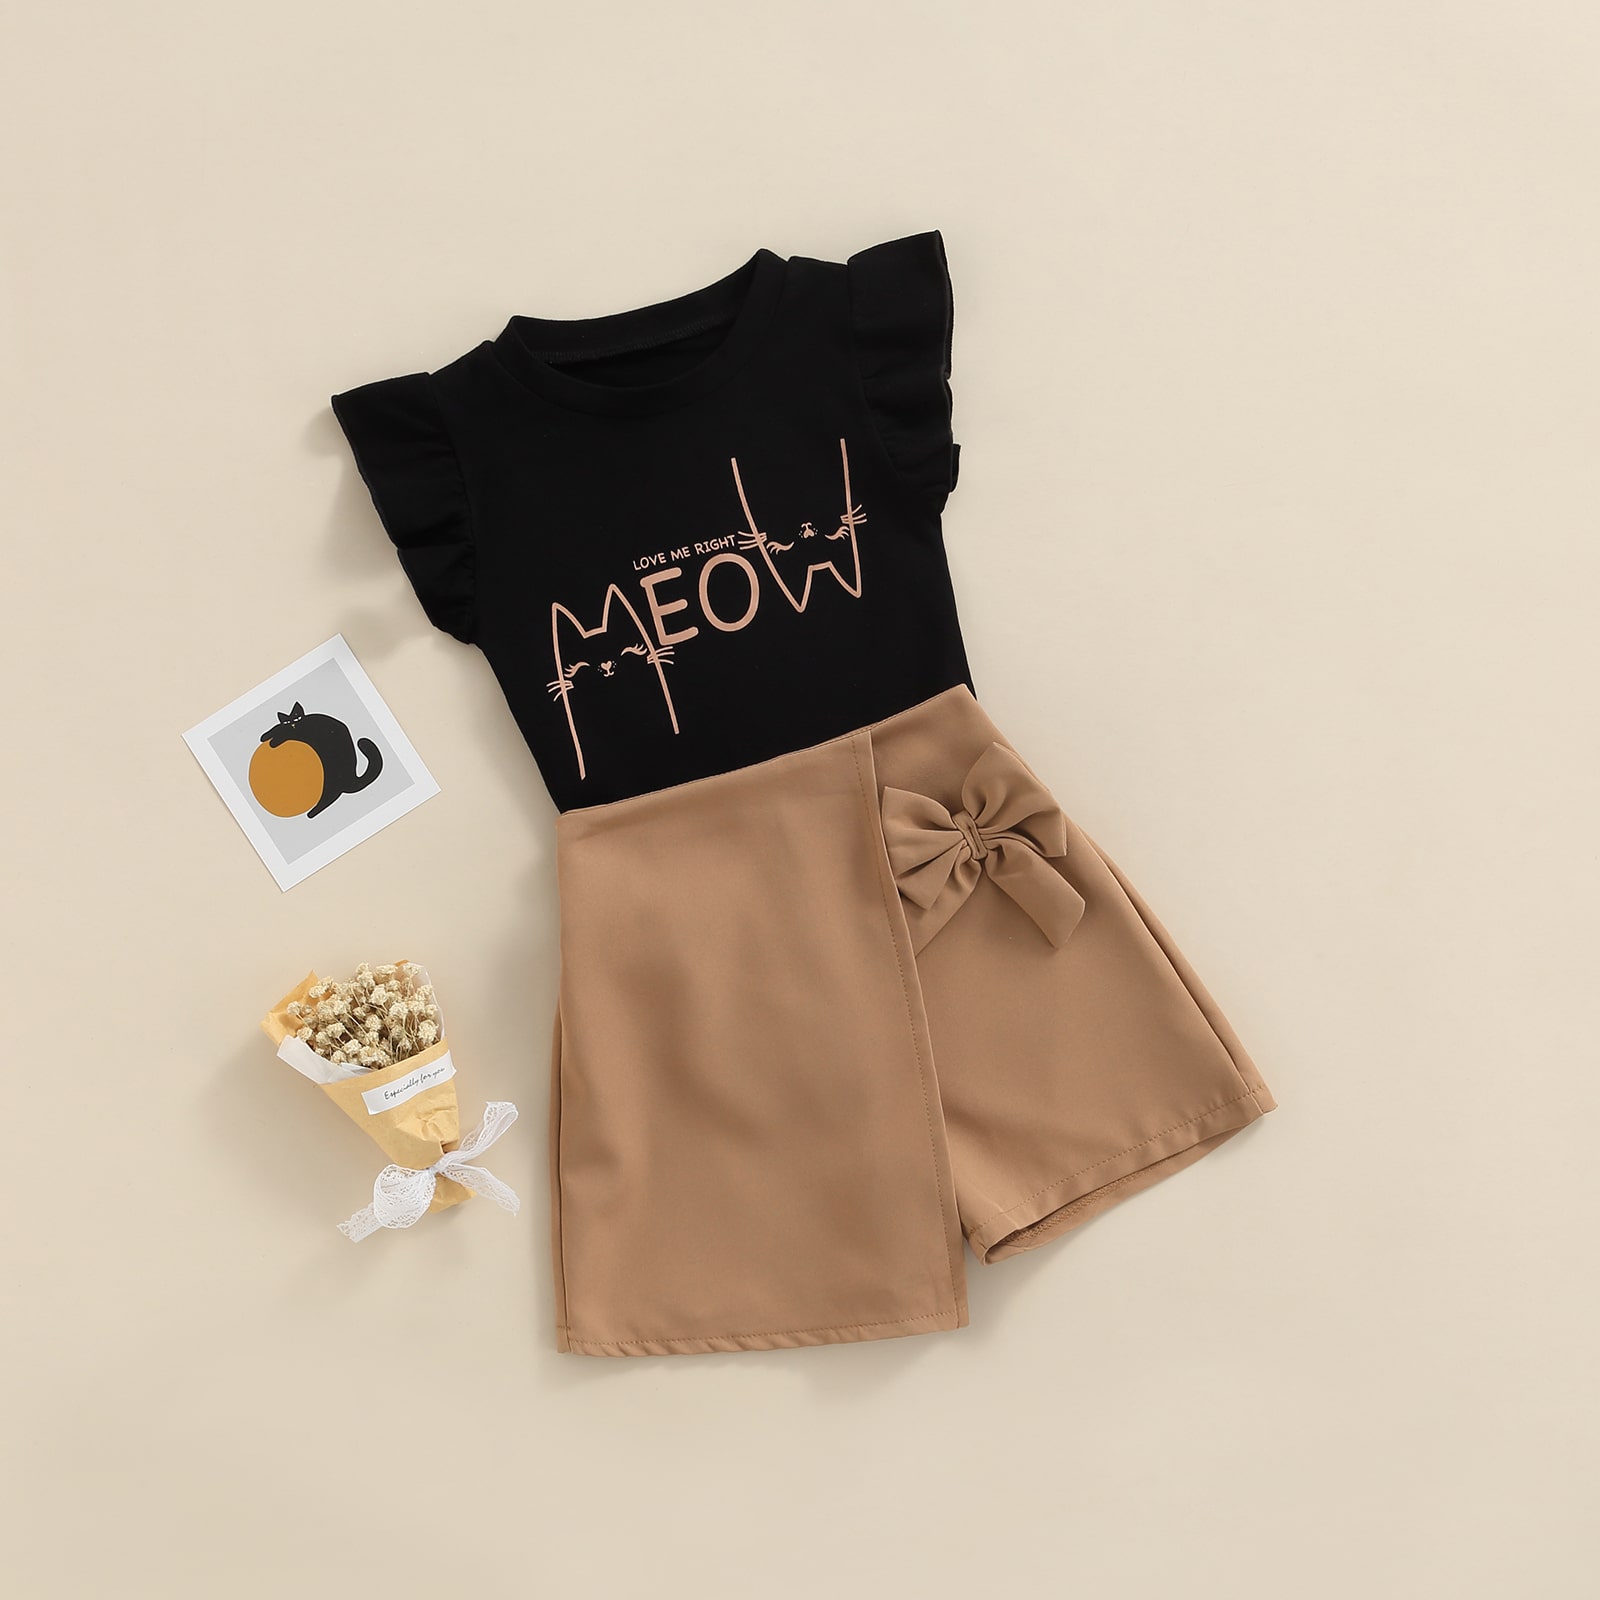 Meow Printed Tops And Divided Skirt